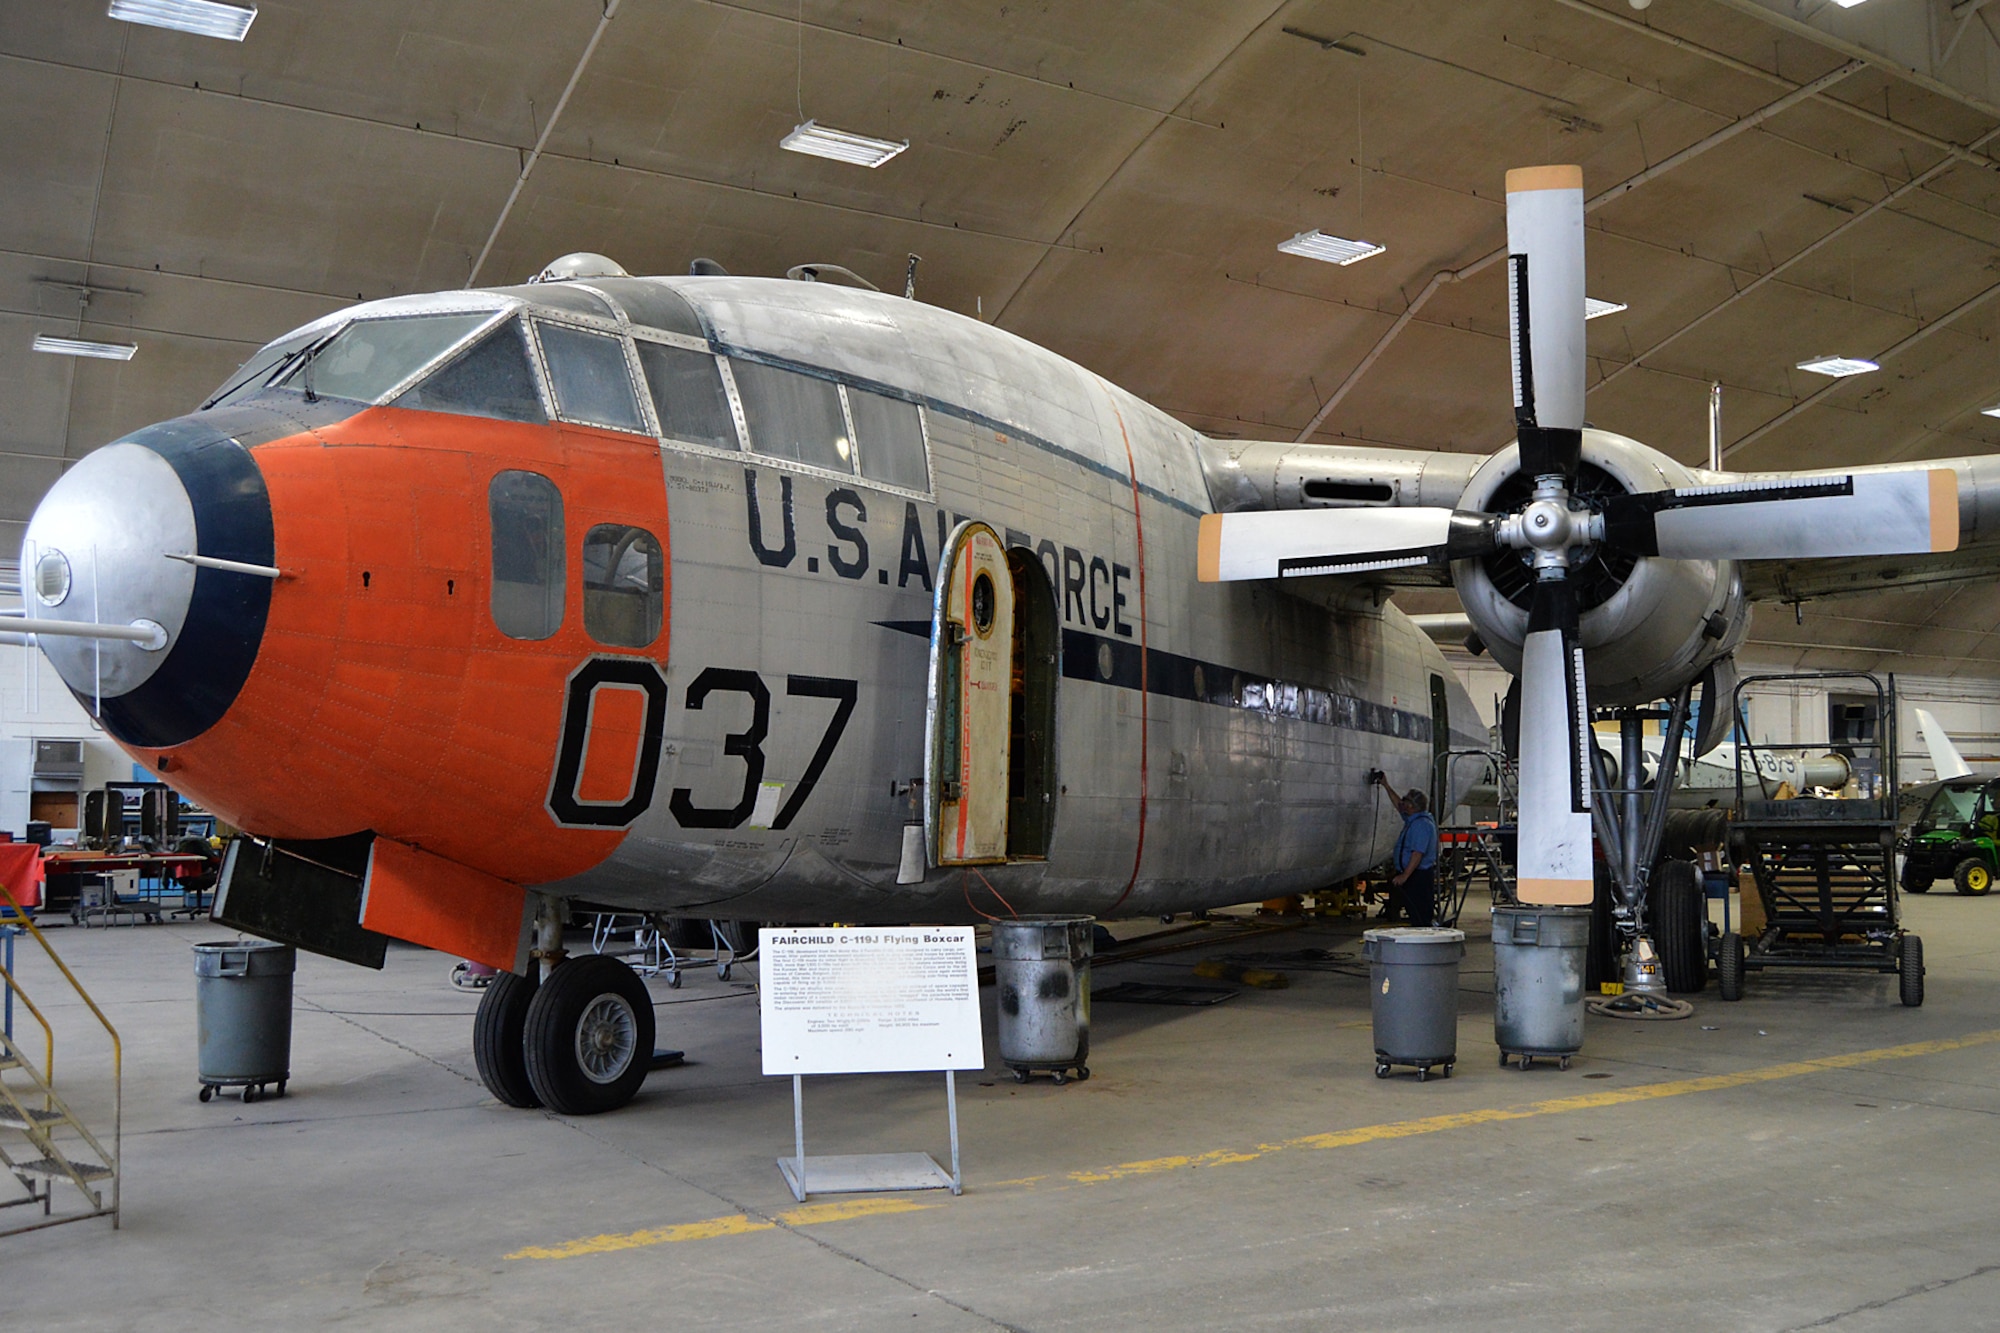 DAYTON, Ohio -- Fairchild C-119J Flying Boxcar in the restoration hangar at the National Museum of the United States Air Force. (U.S. Air Force photo)
